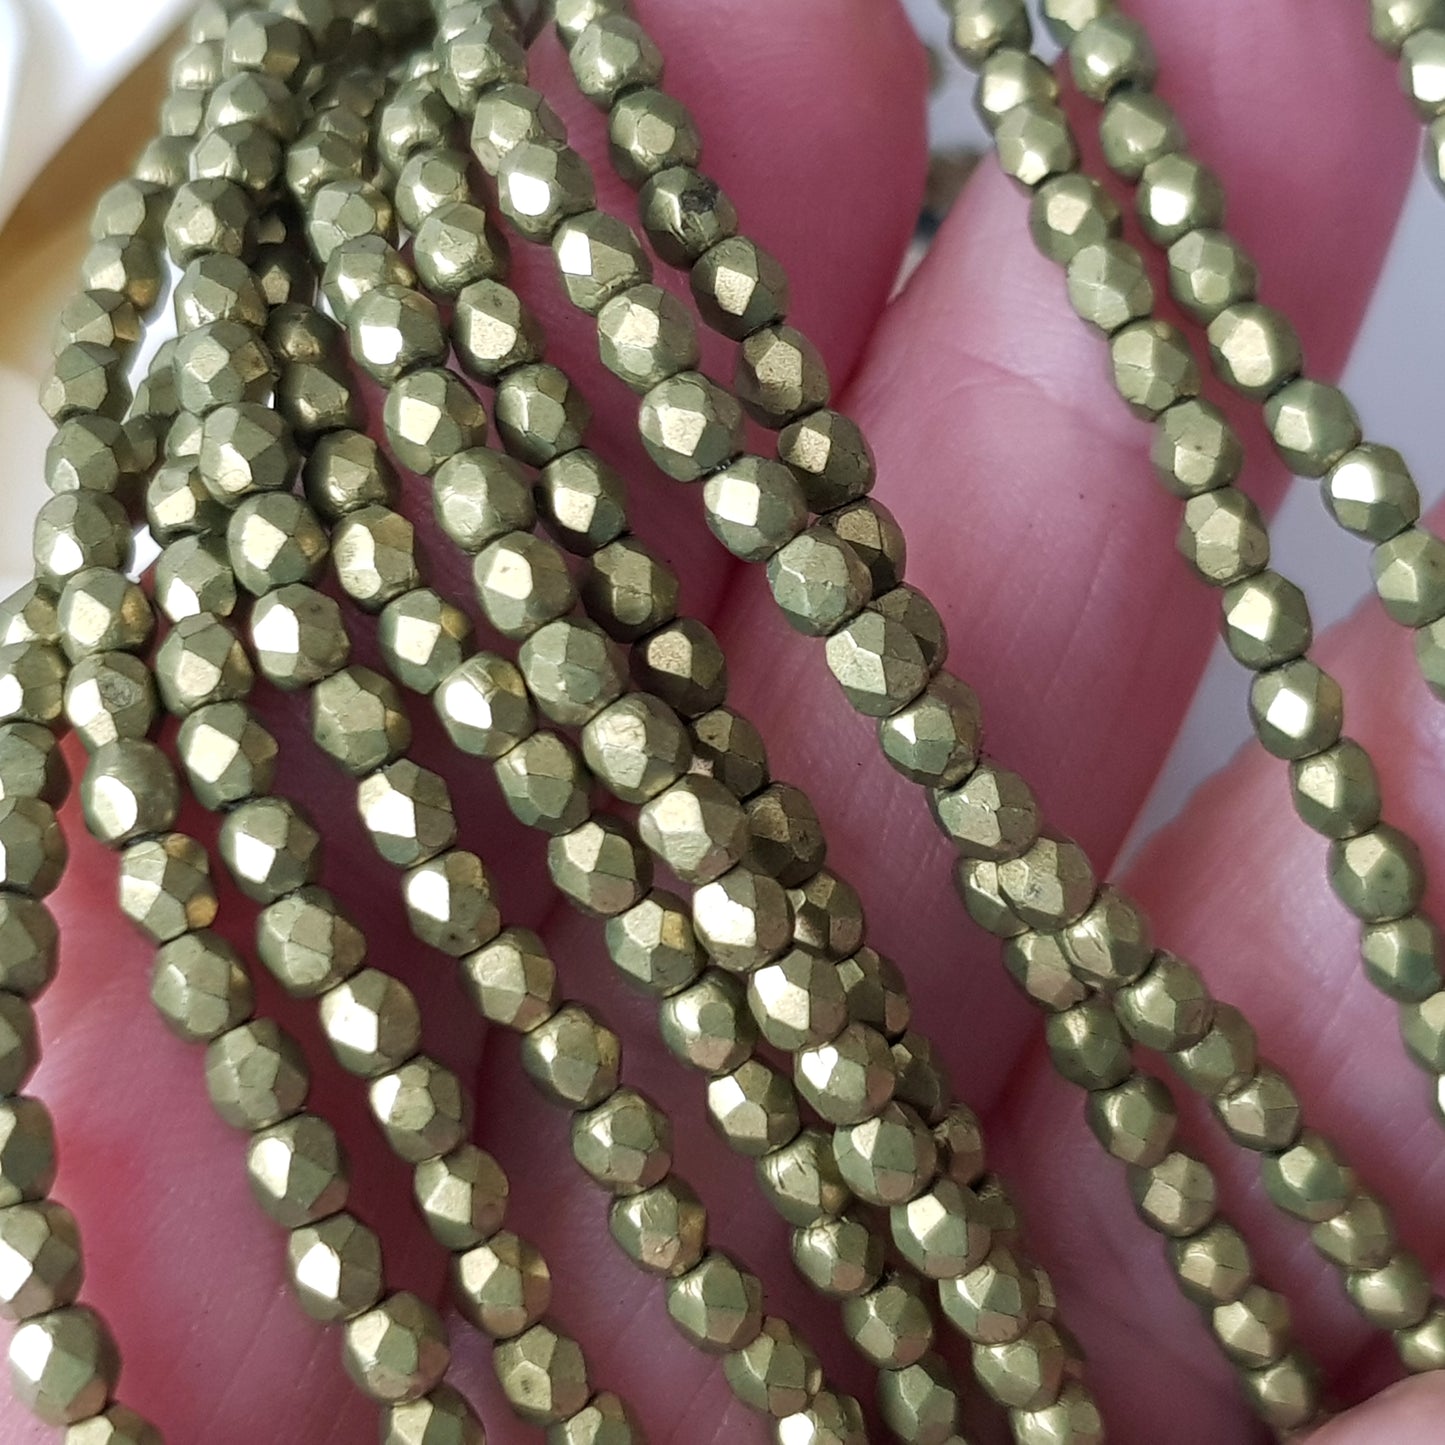 Czech Fire Polished - Meadowlark Saturated Metallic 3mm Round 50 Bead Strand  |  FP-03-05A03 | Beading Supply